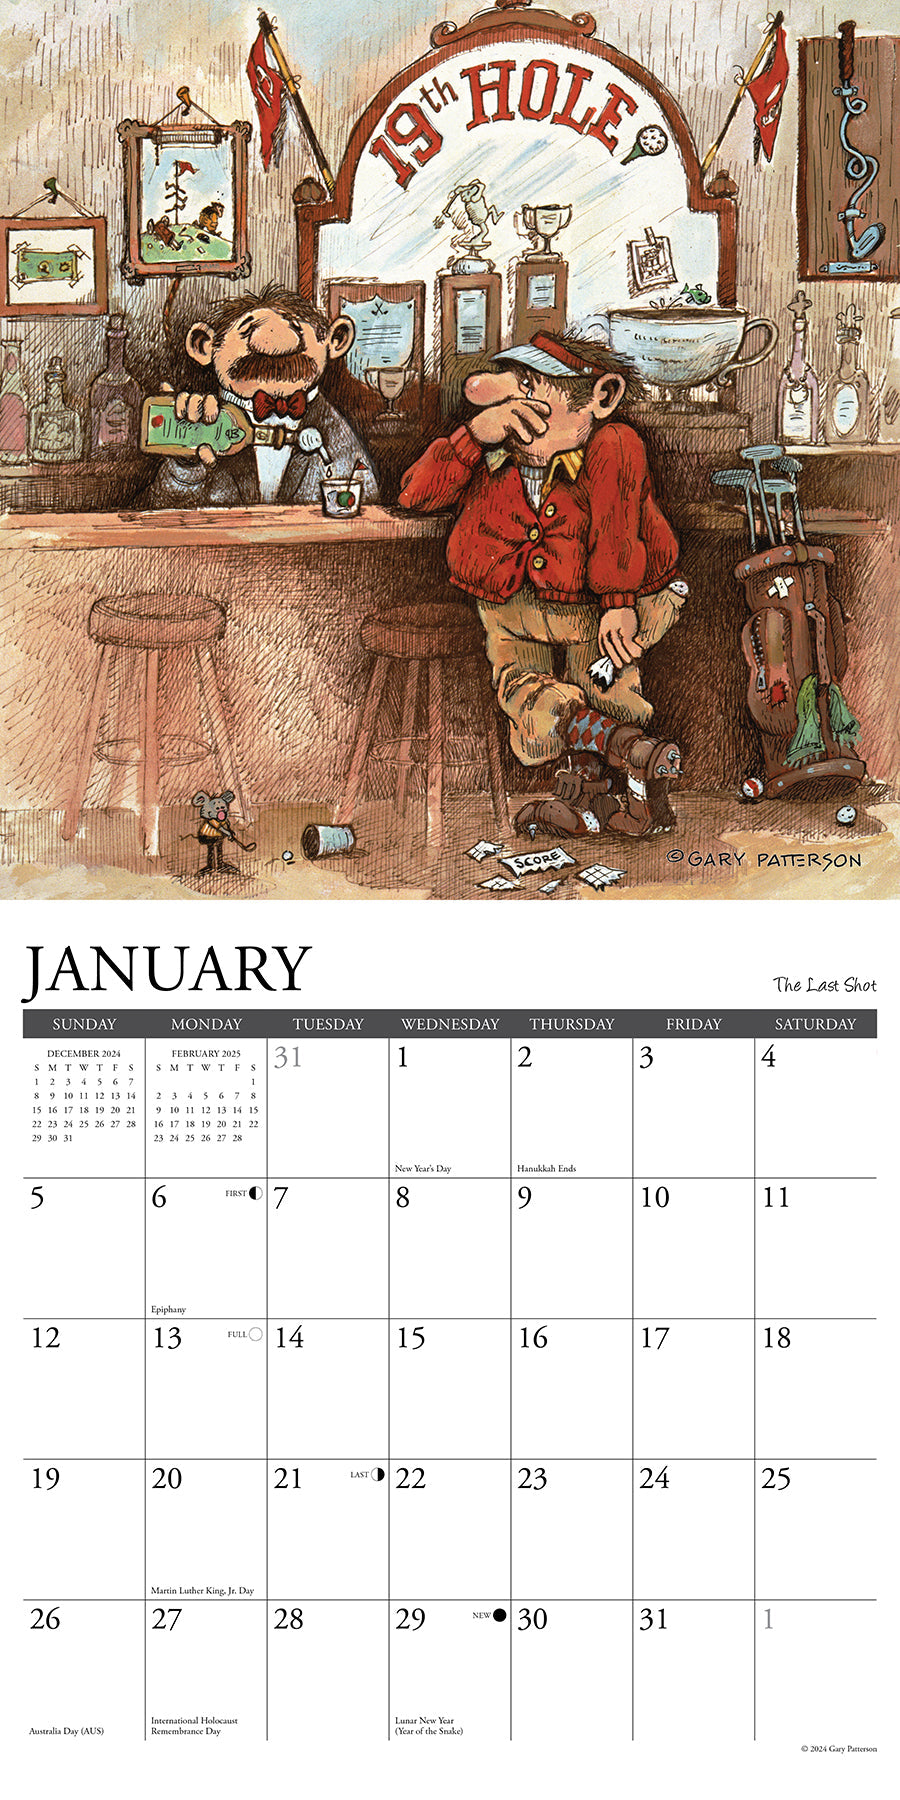 2025 Golf Crazy by Gary Patterson - Square Wall Calendar